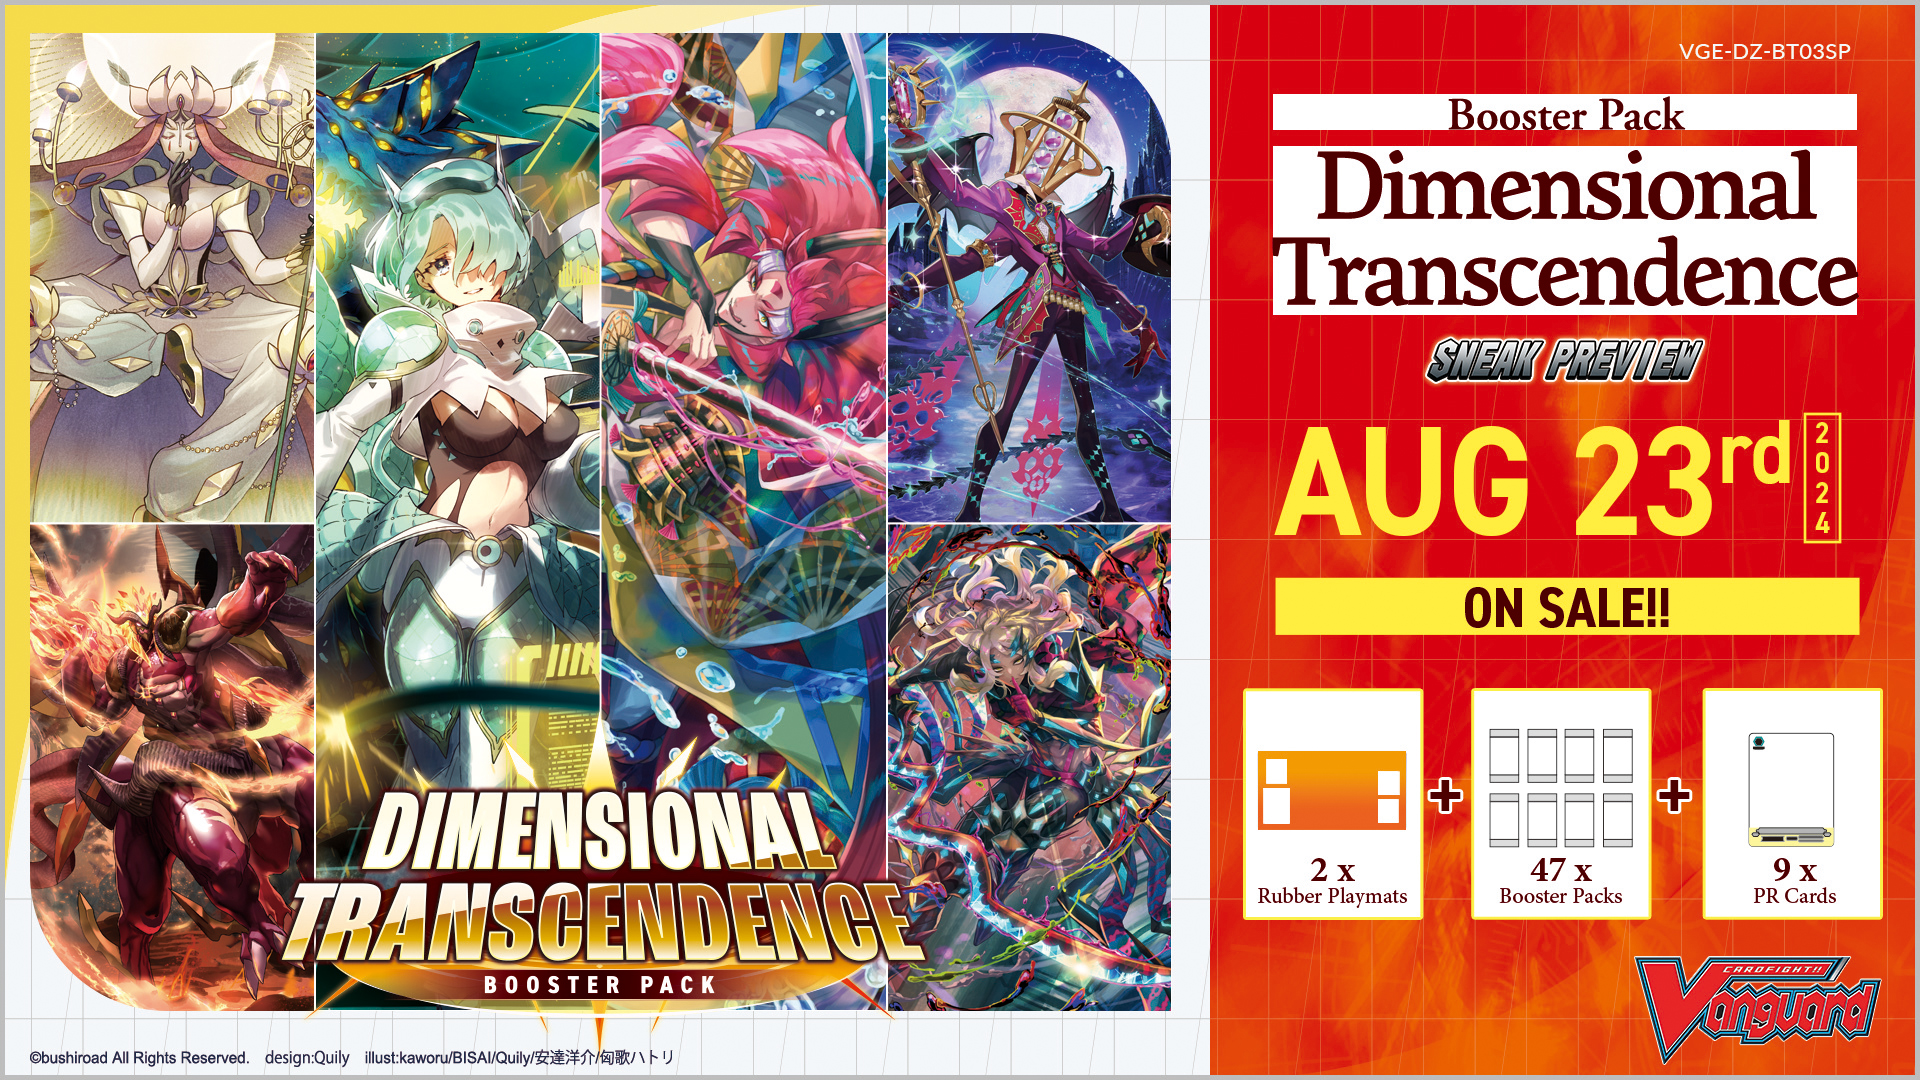 Cardfight!! Vanguard Booster Pack Dimensional Transcendence Sneak Preview